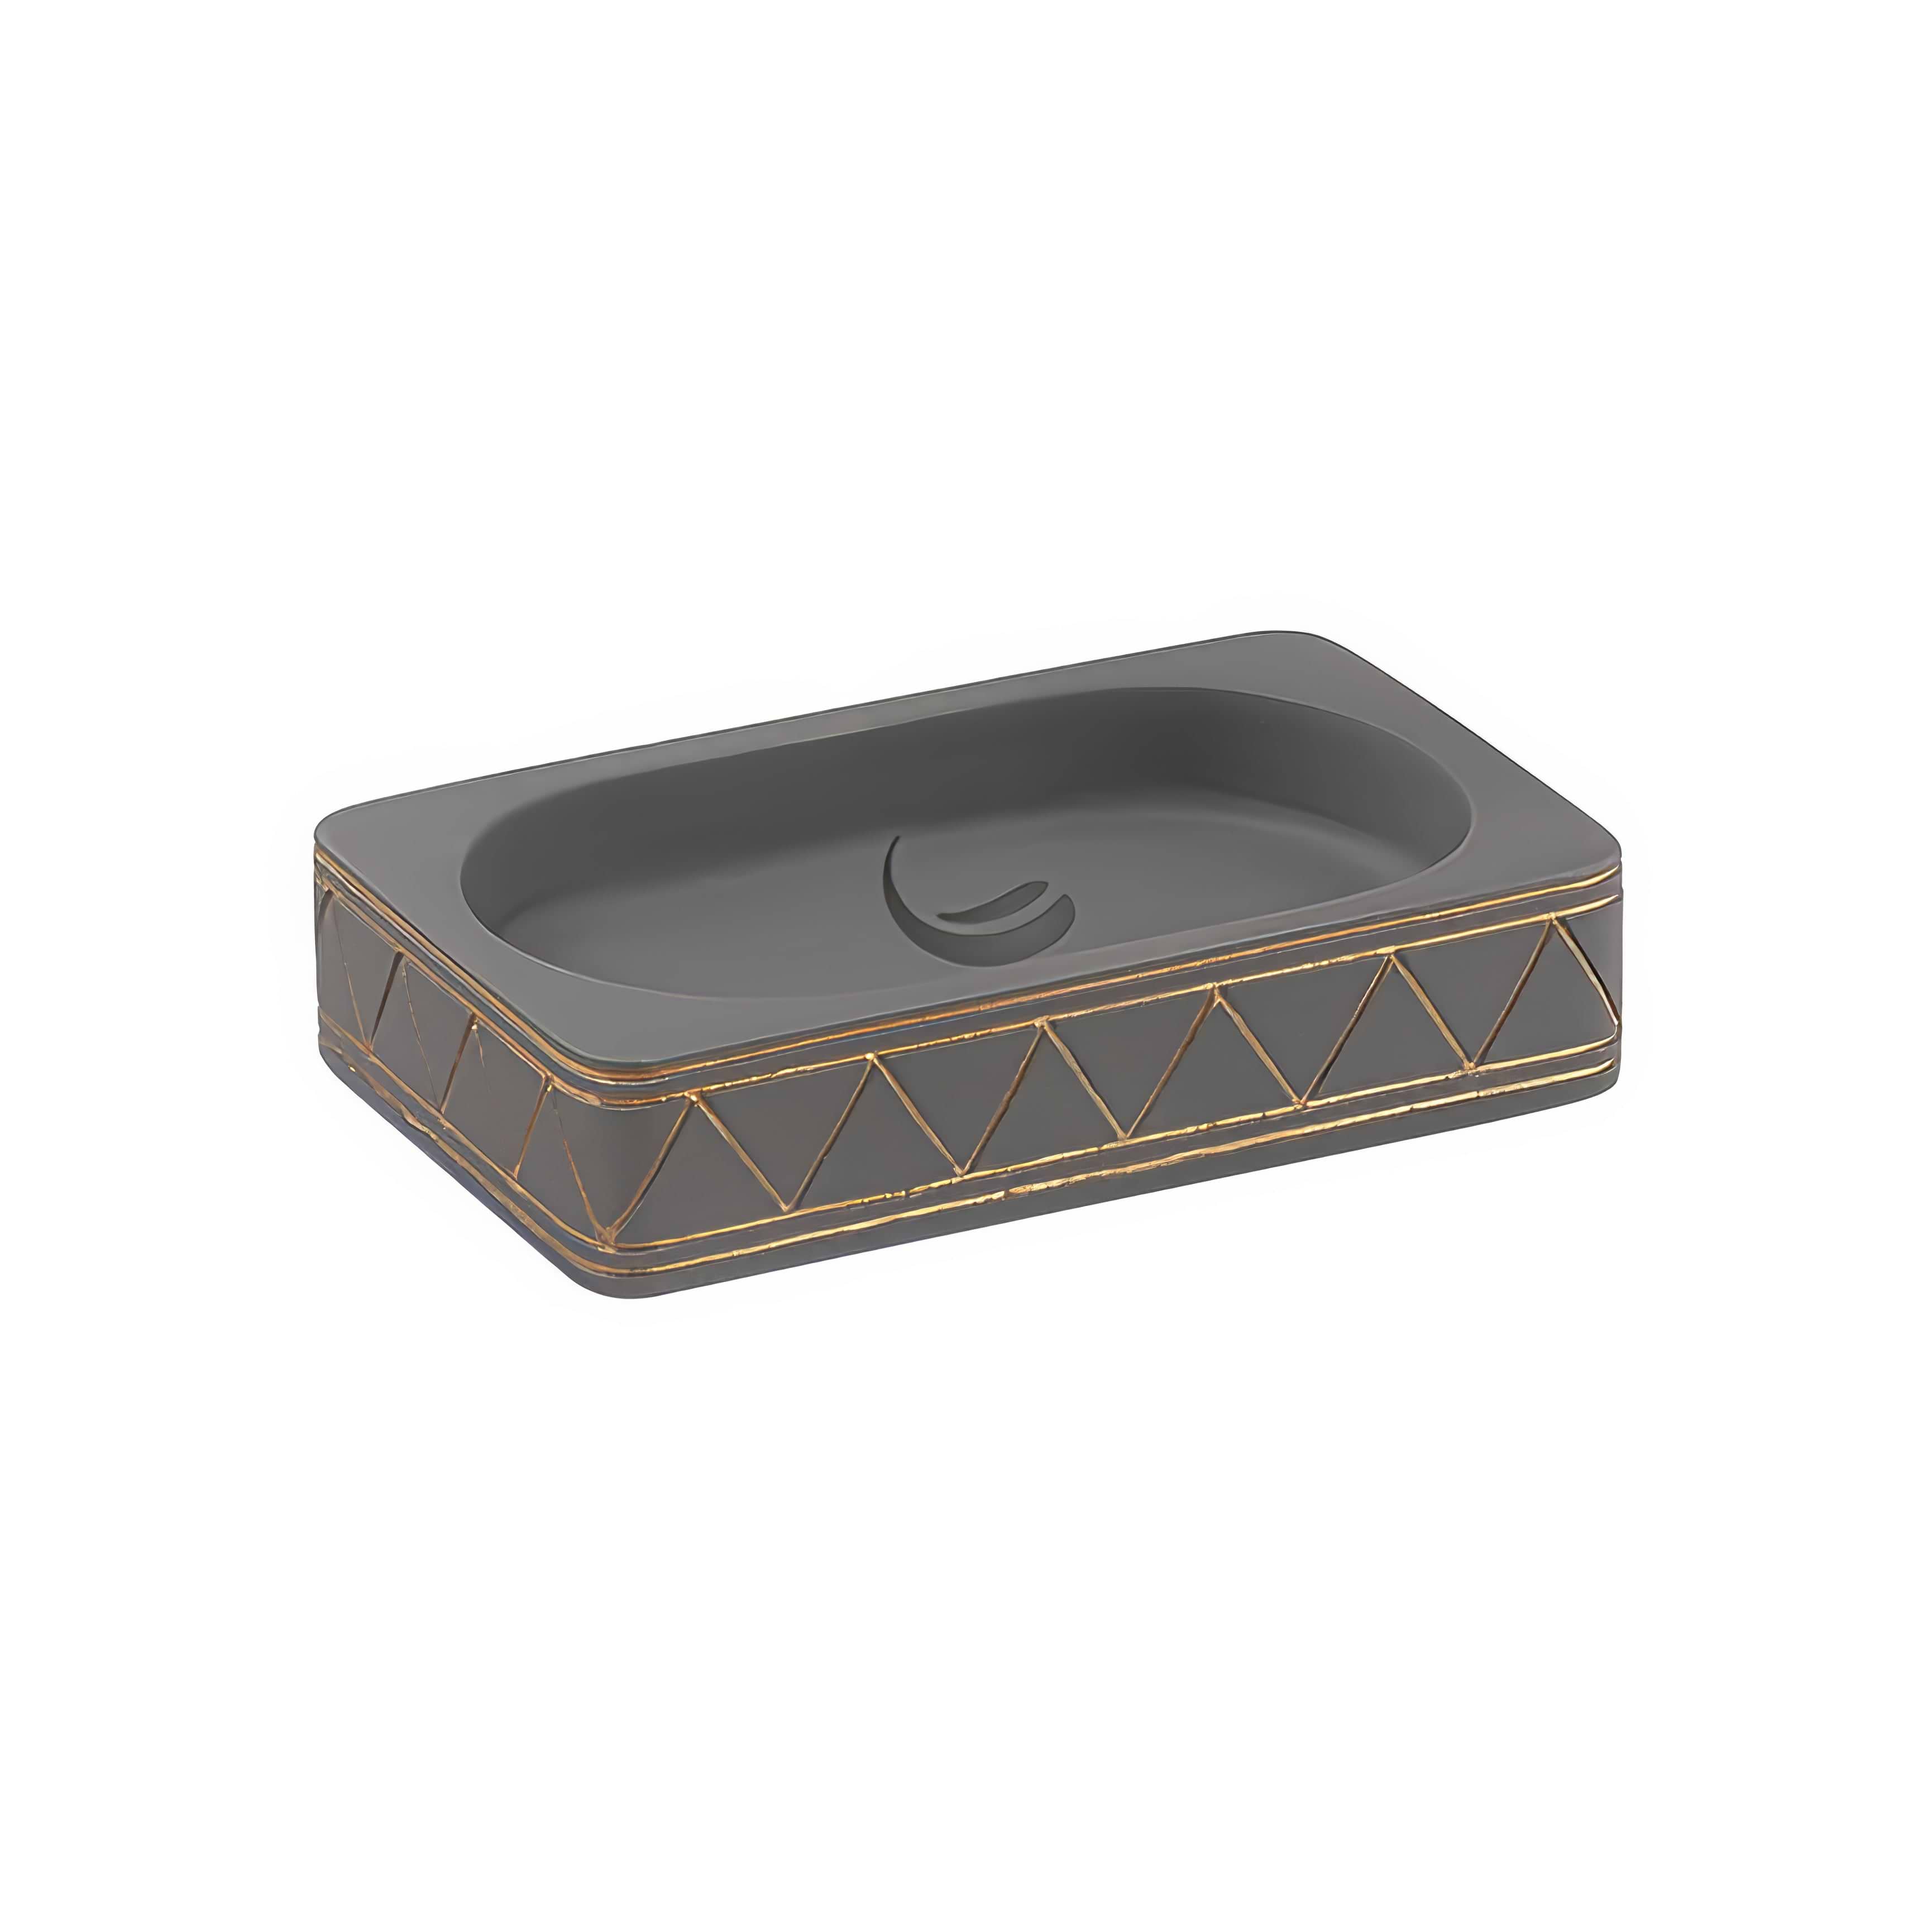 Calipso Soap Dish Grey - Hyperion Tiles